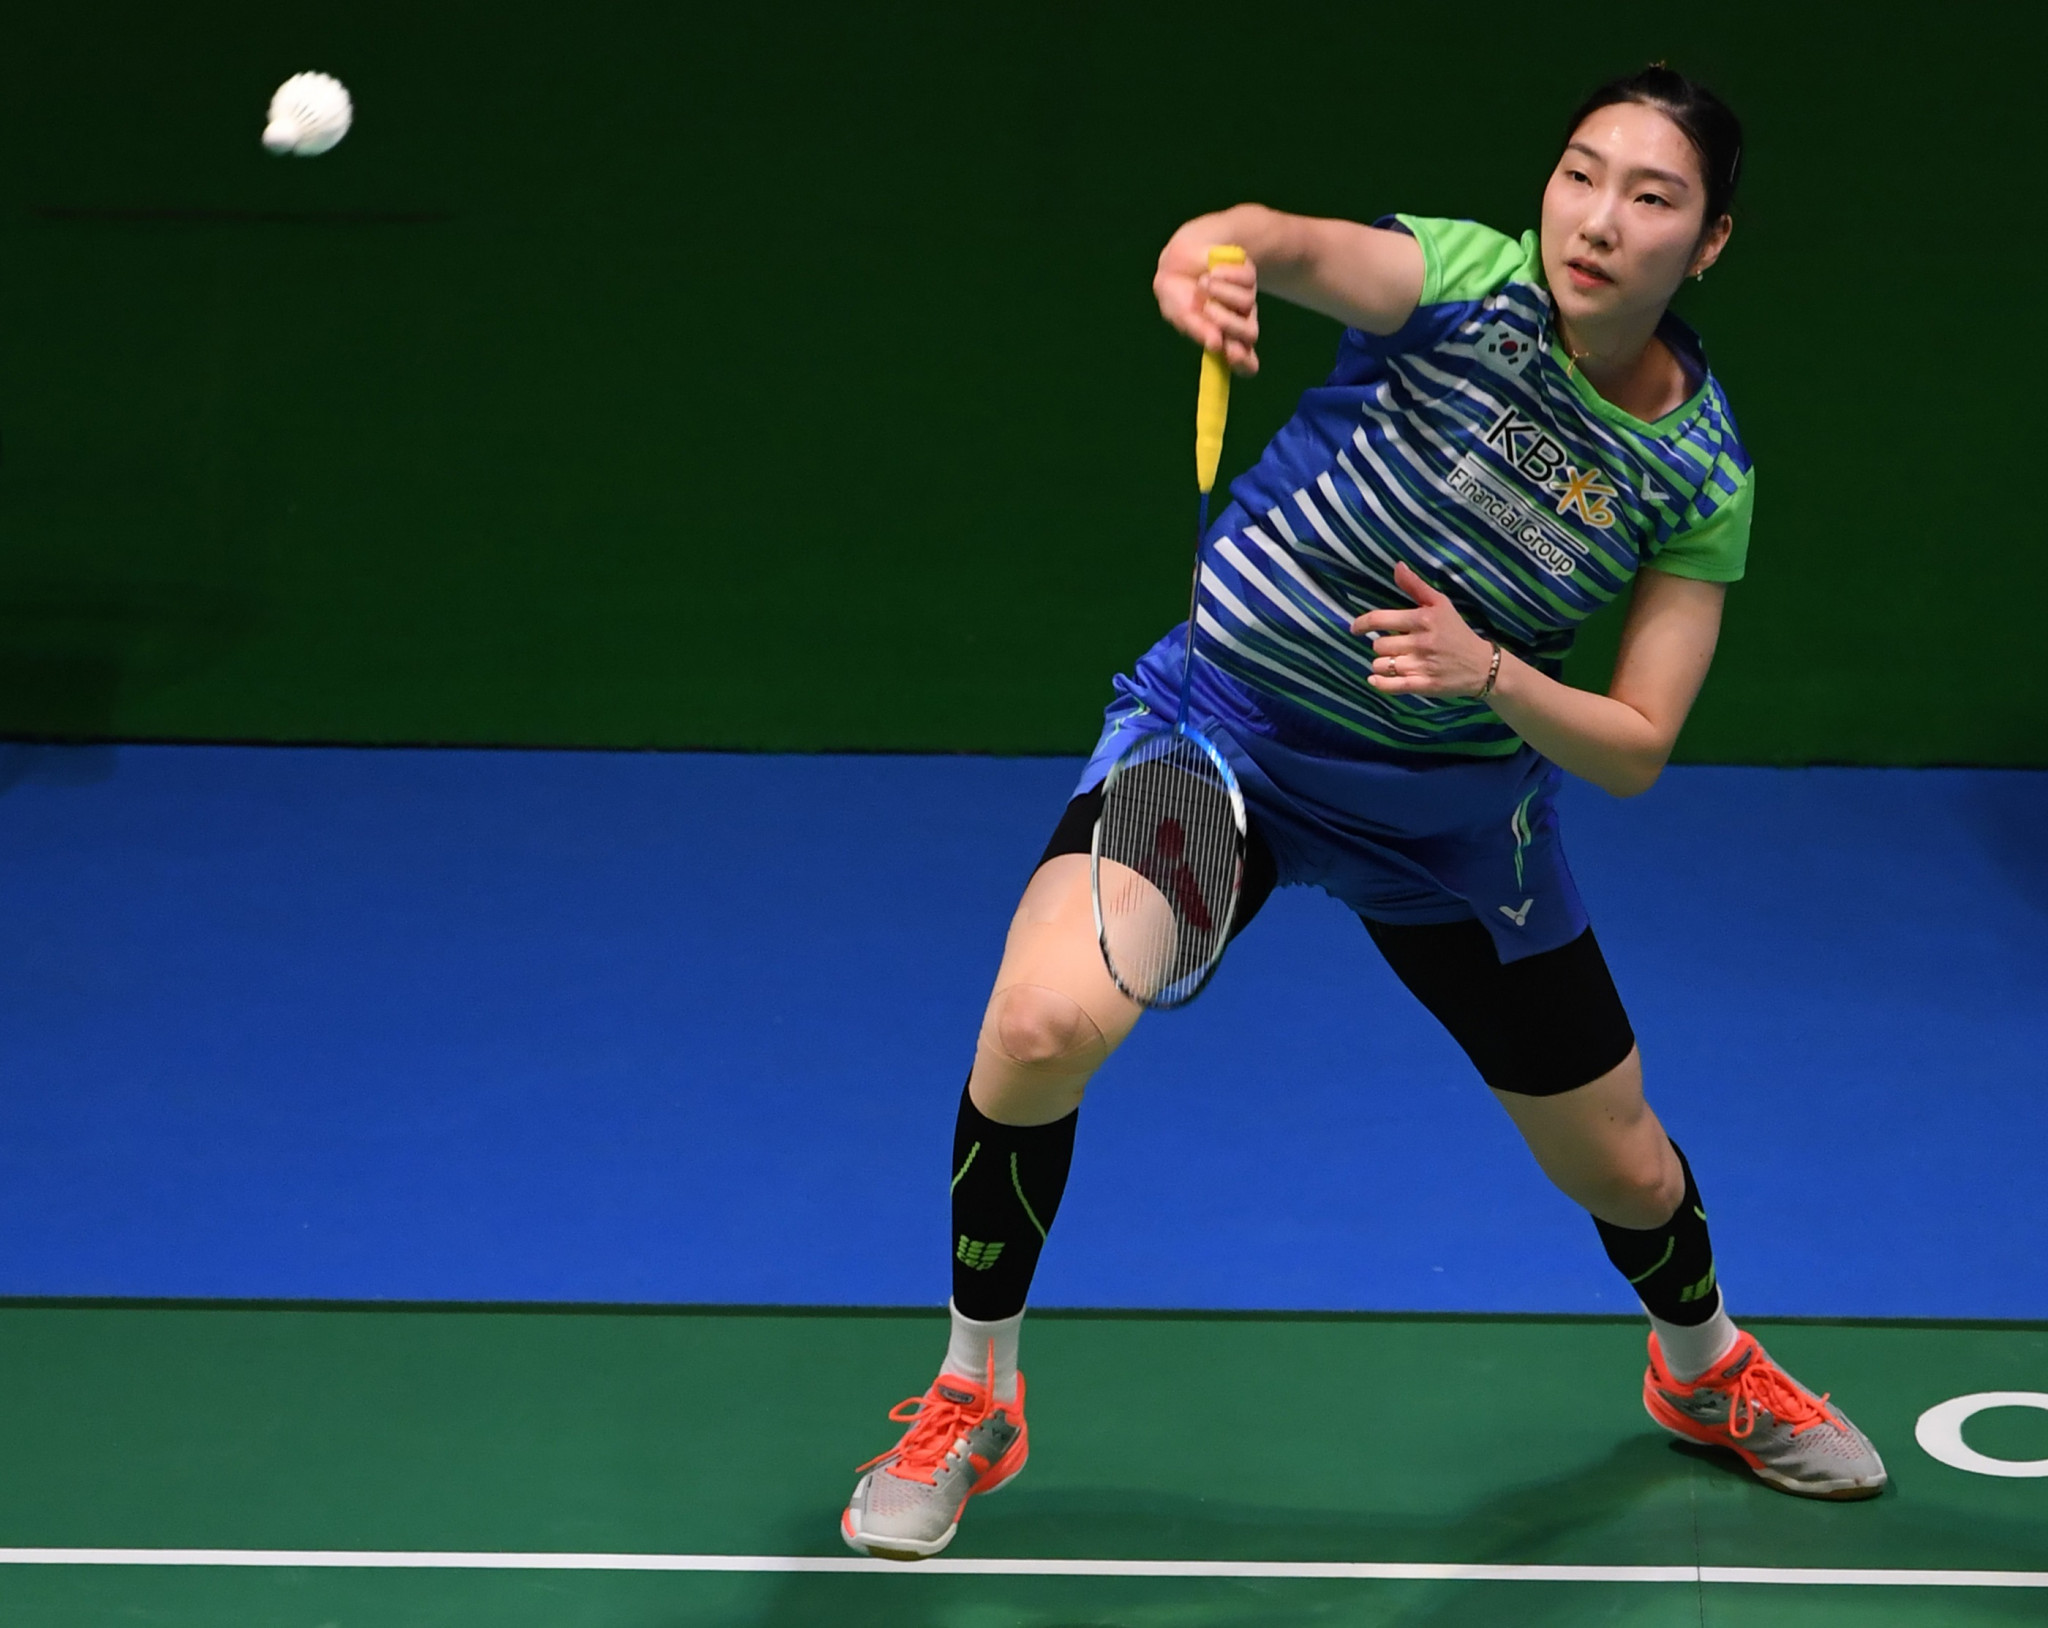 Third seed Sung eliminated from BWF China Open